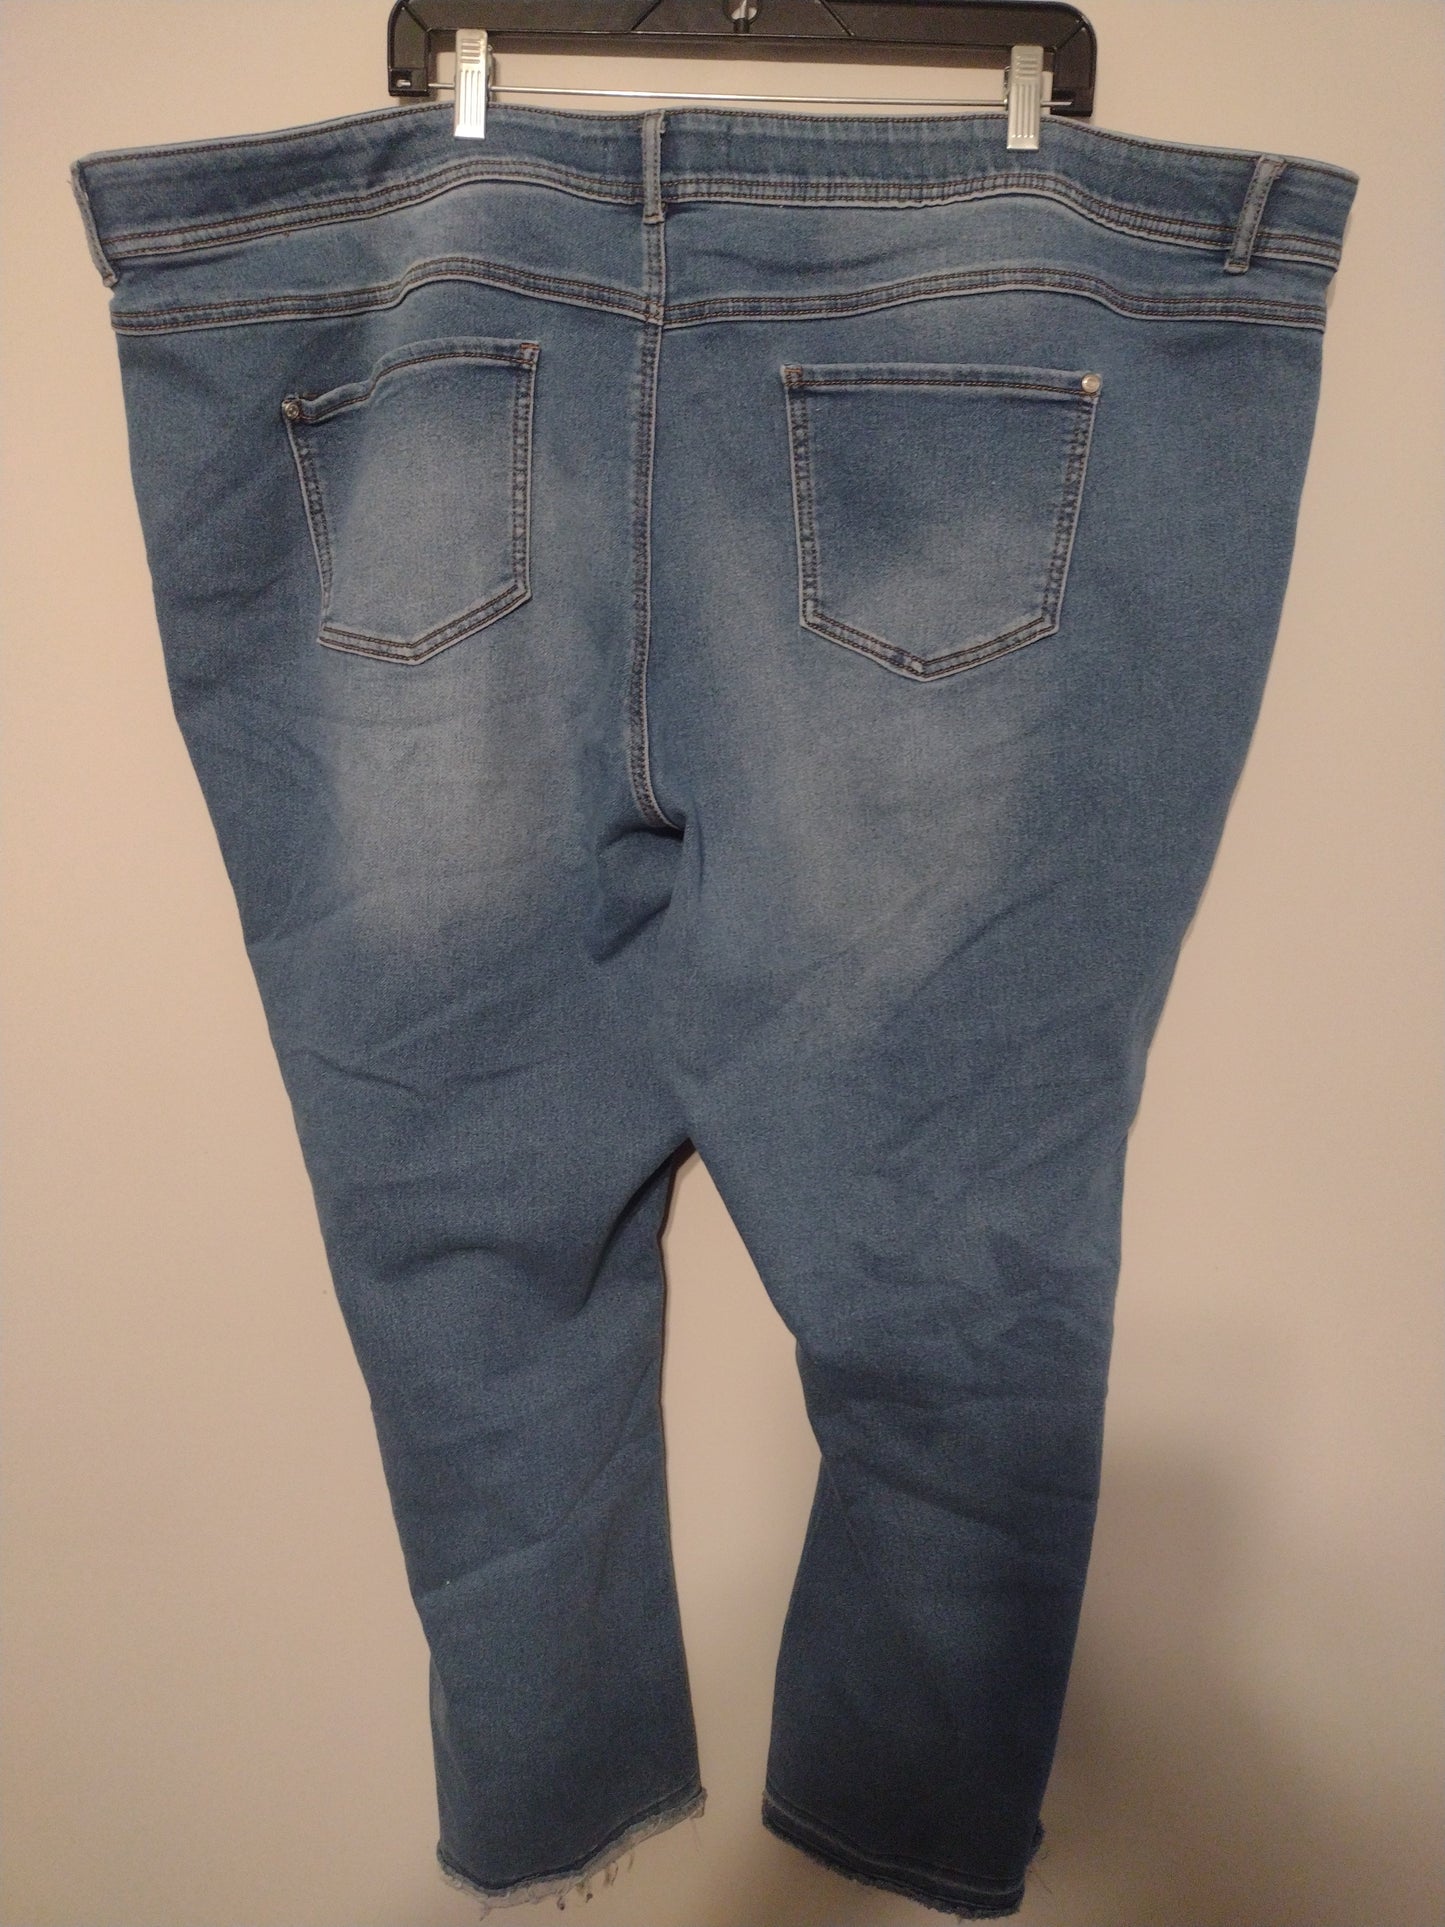 Jeans Straight By Cato  Size: 26